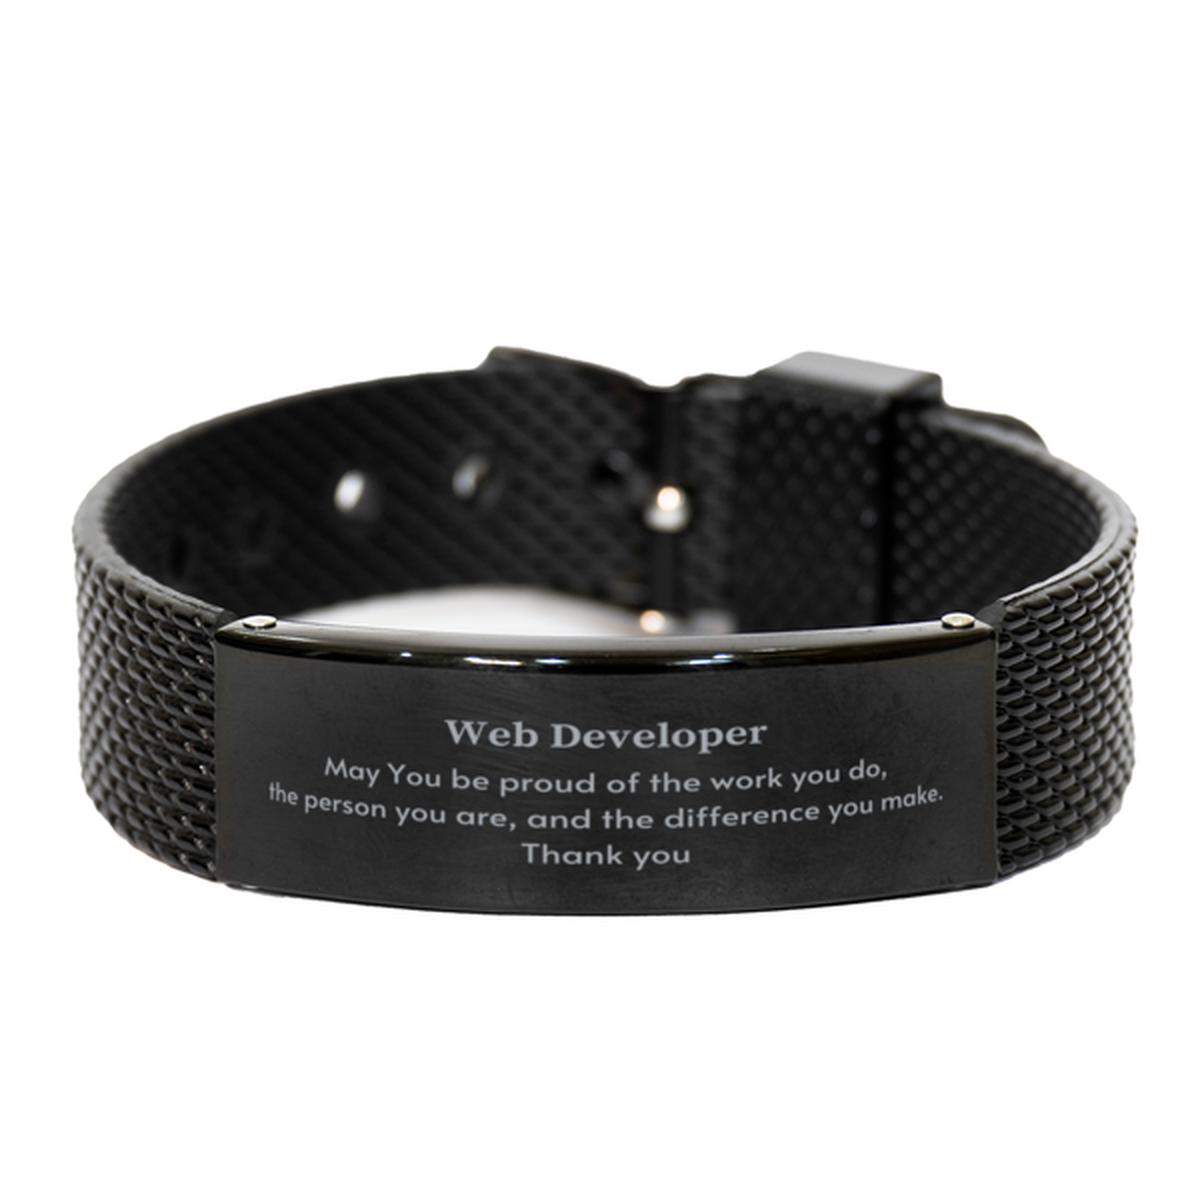 Heartwarming Black Shark Mesh Bracelet Retirement Coworkers Gifts for Web Developer, Web Developer May You be proud of the work you do, the person you are Gifts for Boss Men Women Friends